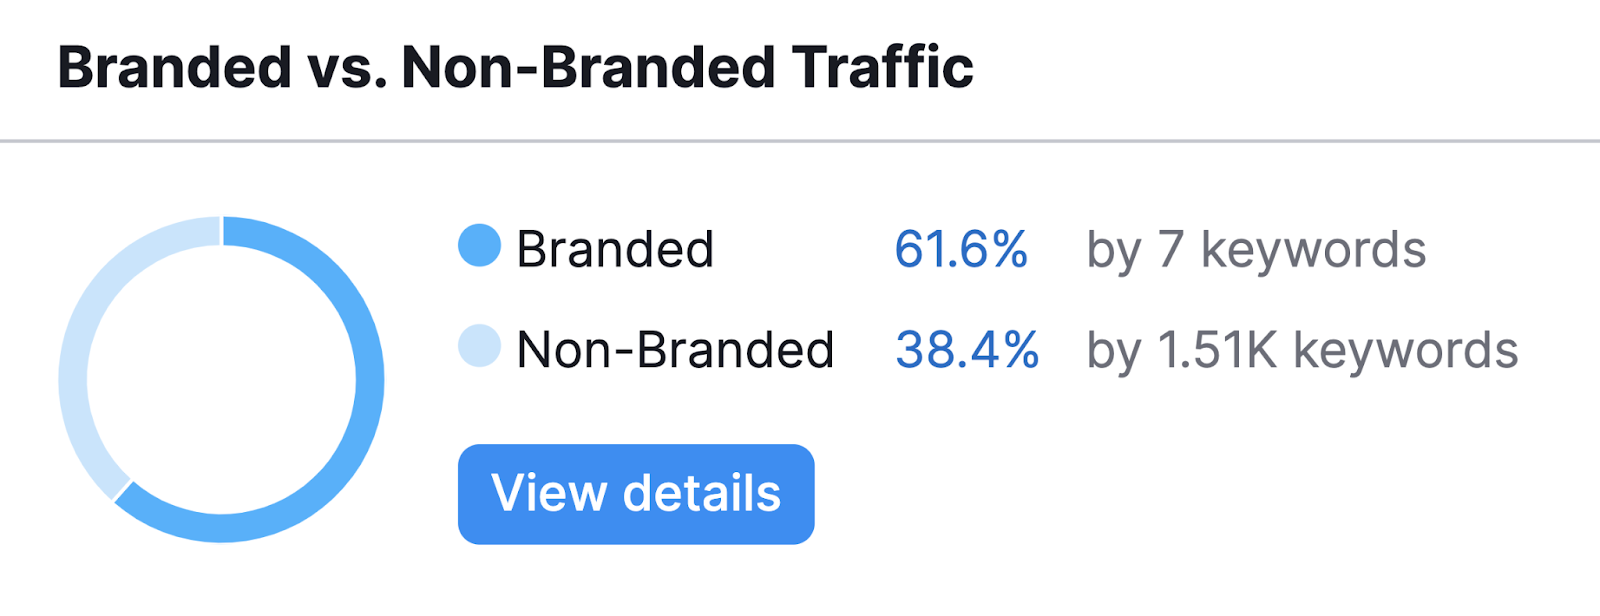 branded traffic shows 61% by 7 keywords and non-branded traffic is 38% by over 1,500 keywords